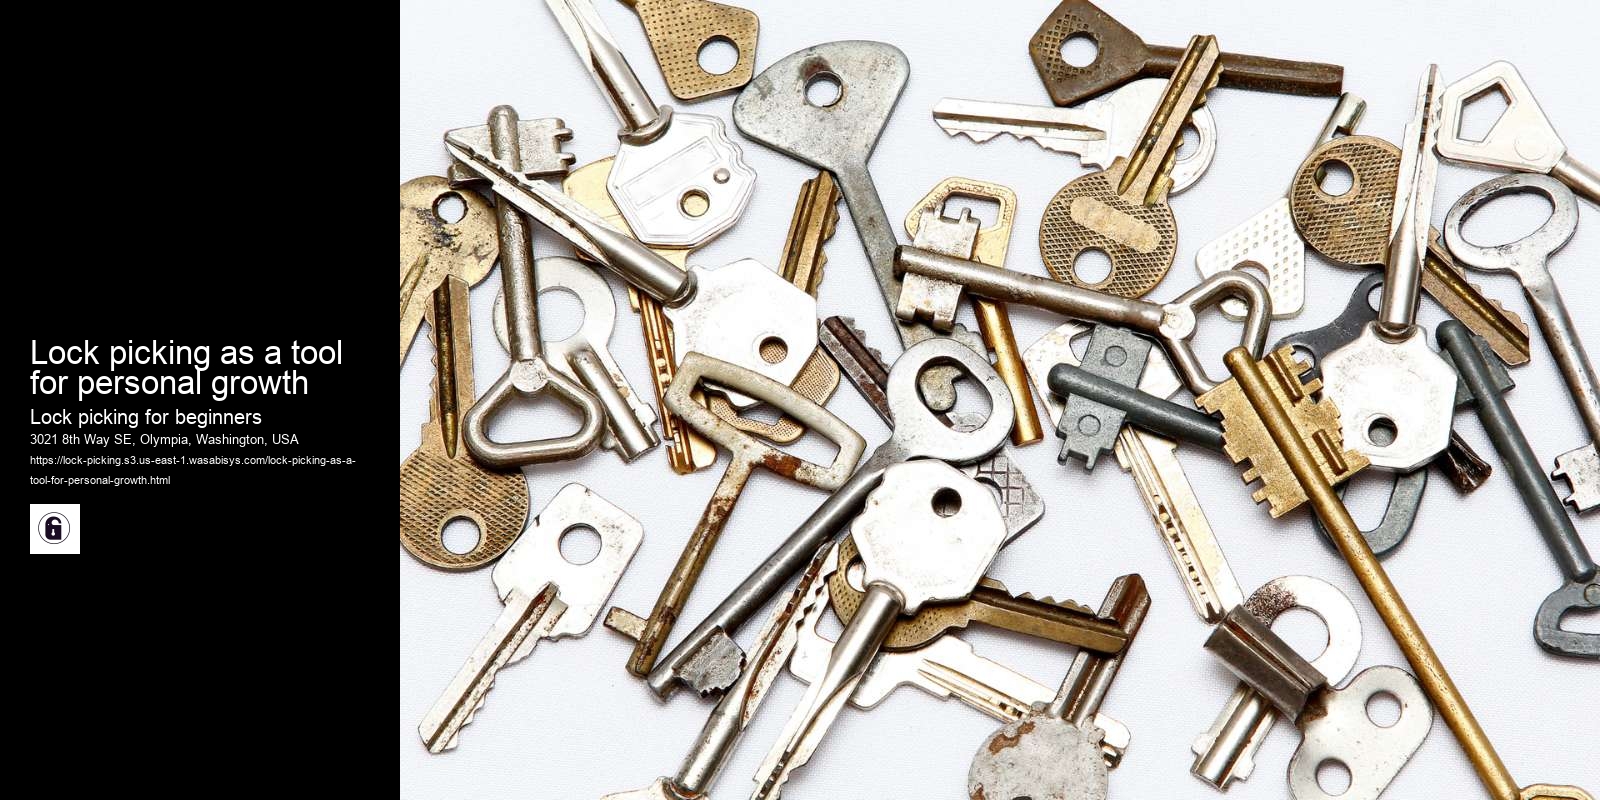 Lock picking as a tool for personal growth